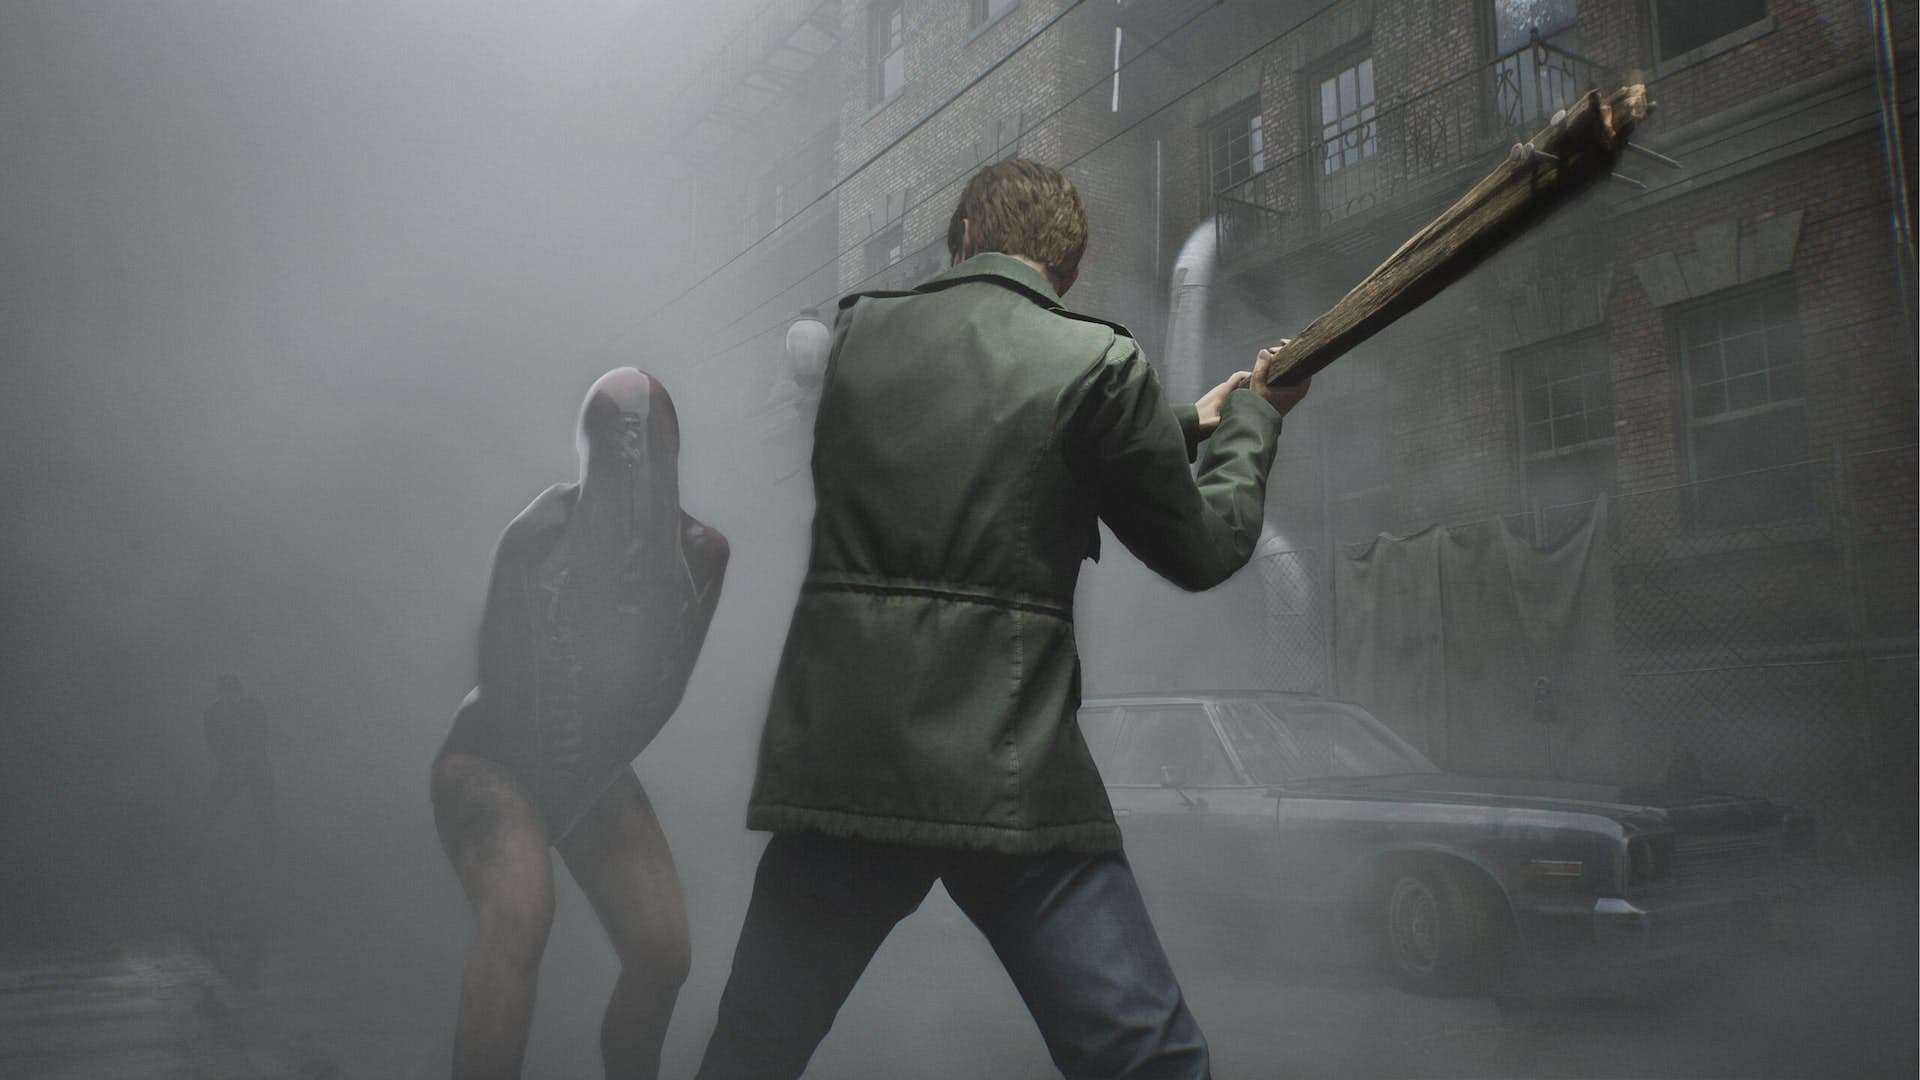 Silent Hill 2 Remake Has Great Art Direction; New Trailers To Be Shown Soon  - Rumor